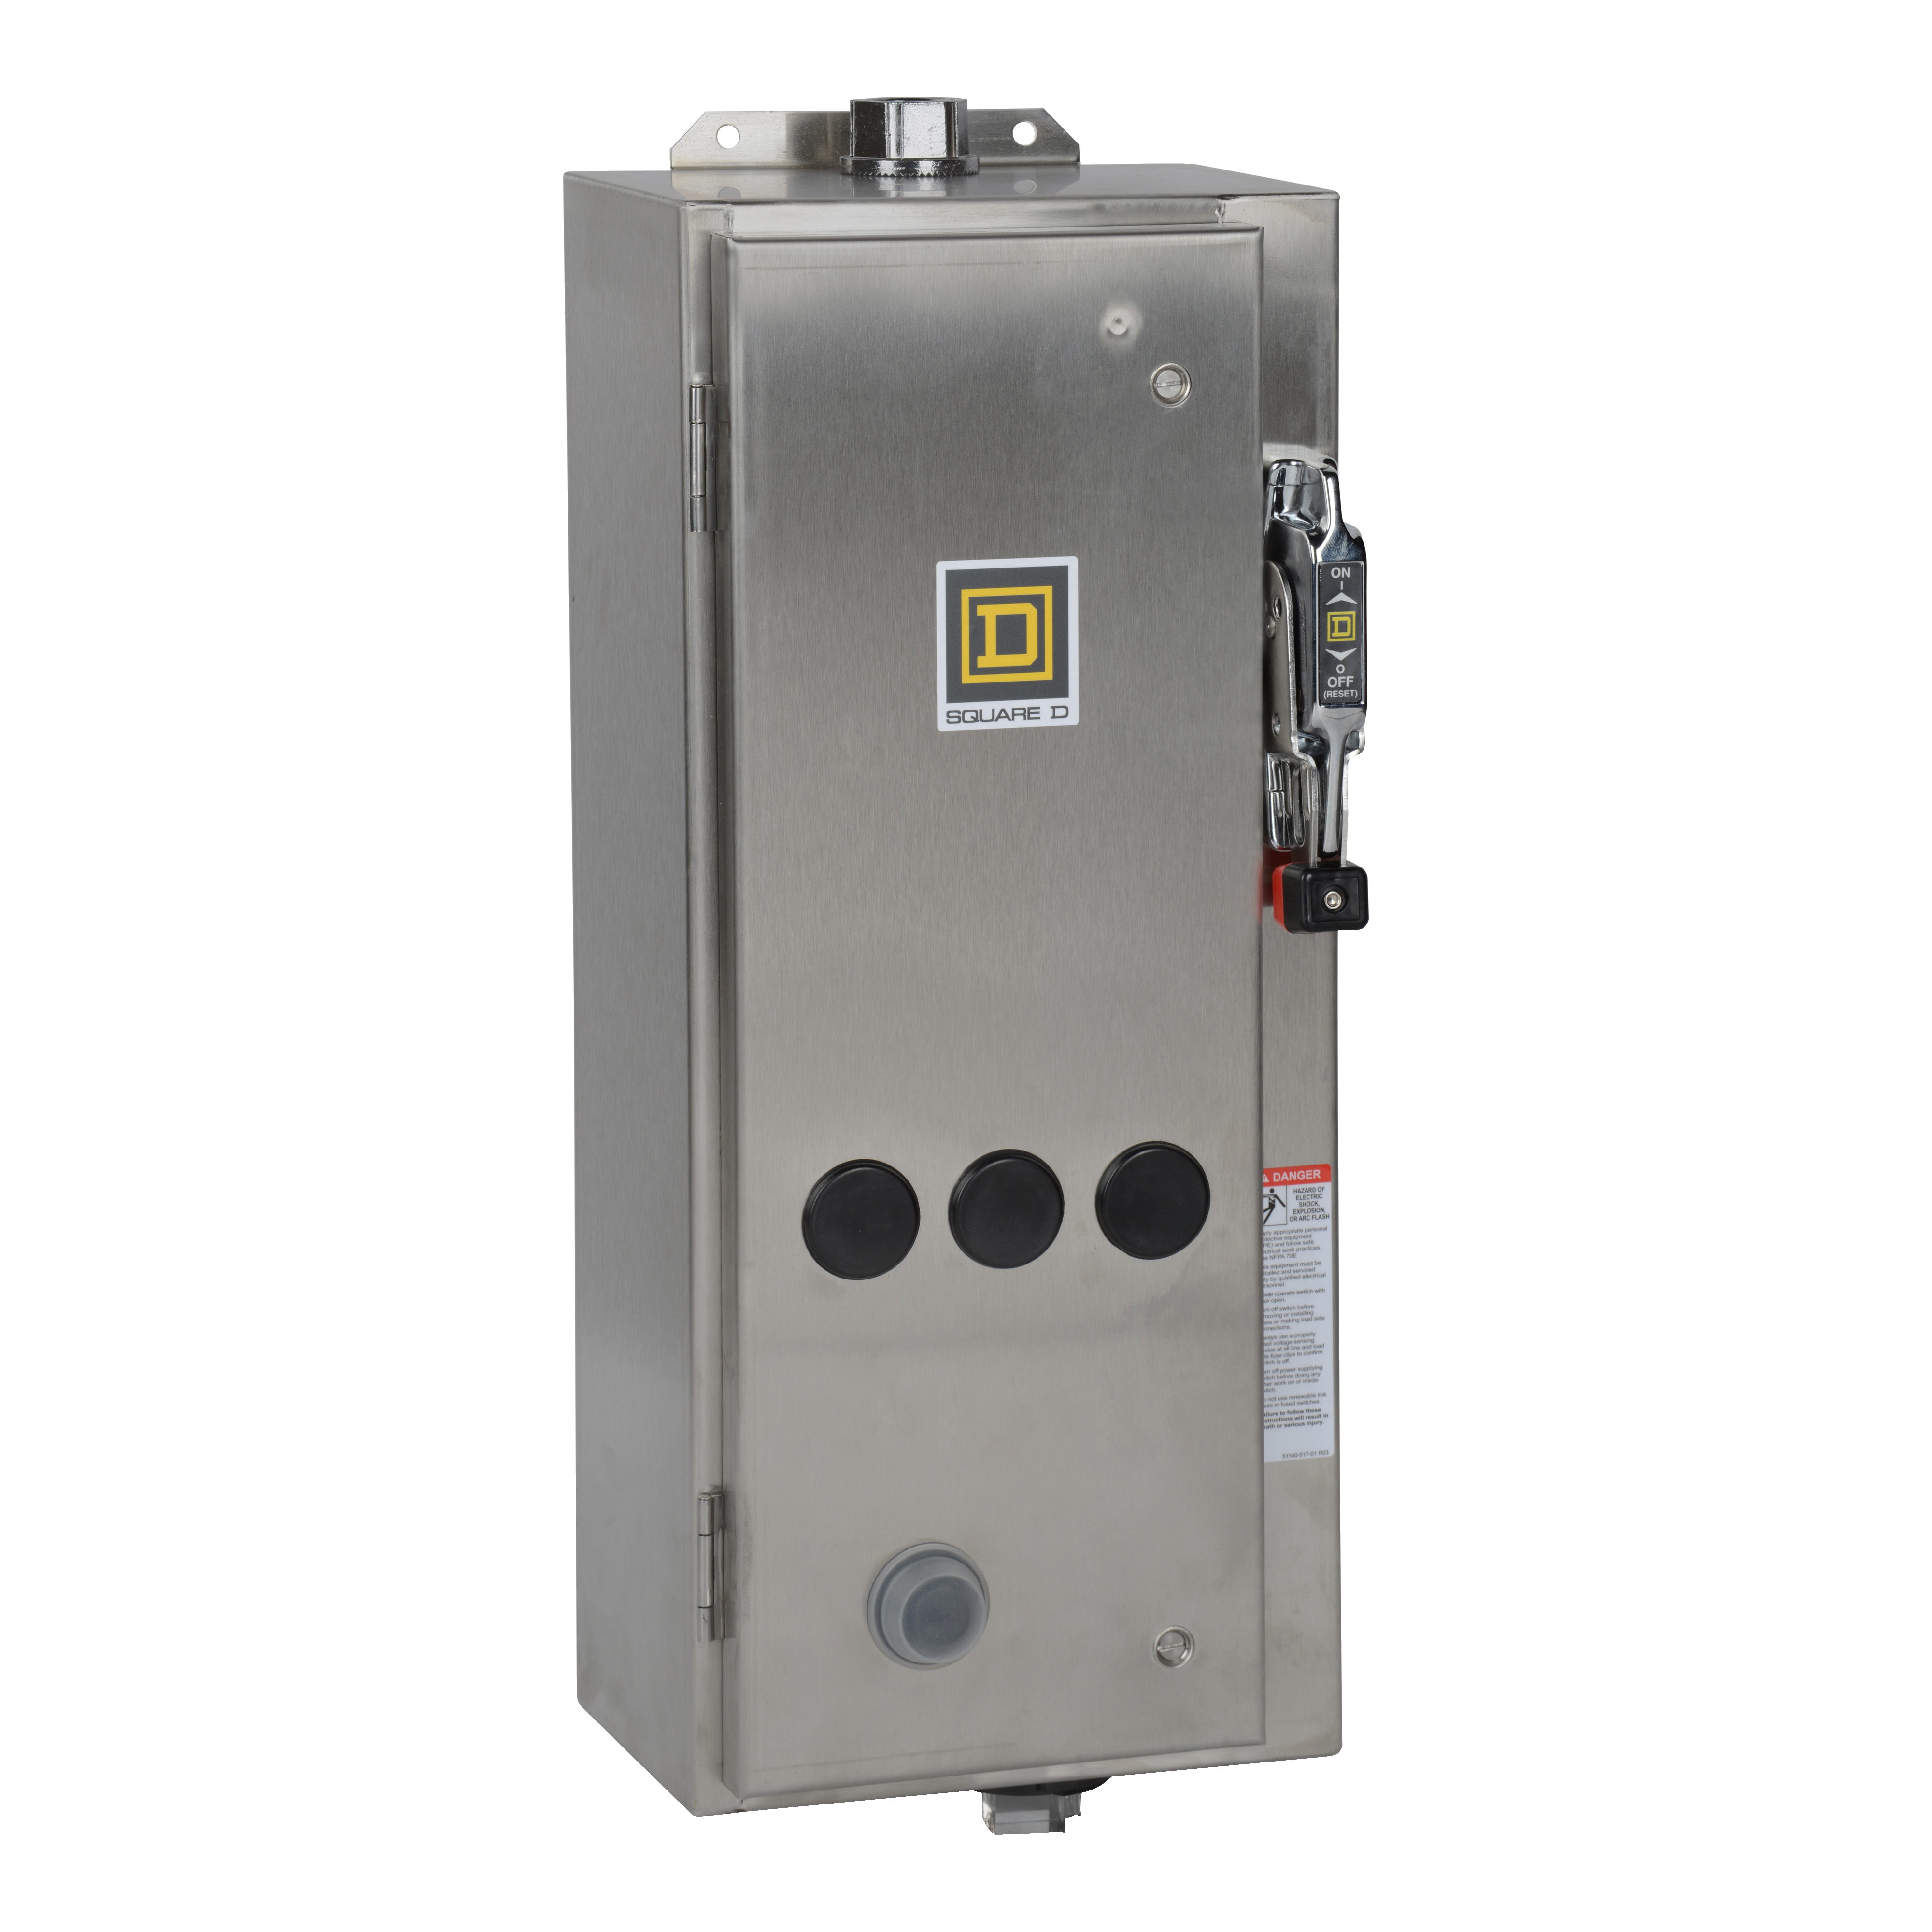 NEMA Combination Starter, Type S, 60A fusible disconnect, Size 1, 27A, 7.5 HP at 240 VAC polyphase, 208VAC coil, NEMA 4X